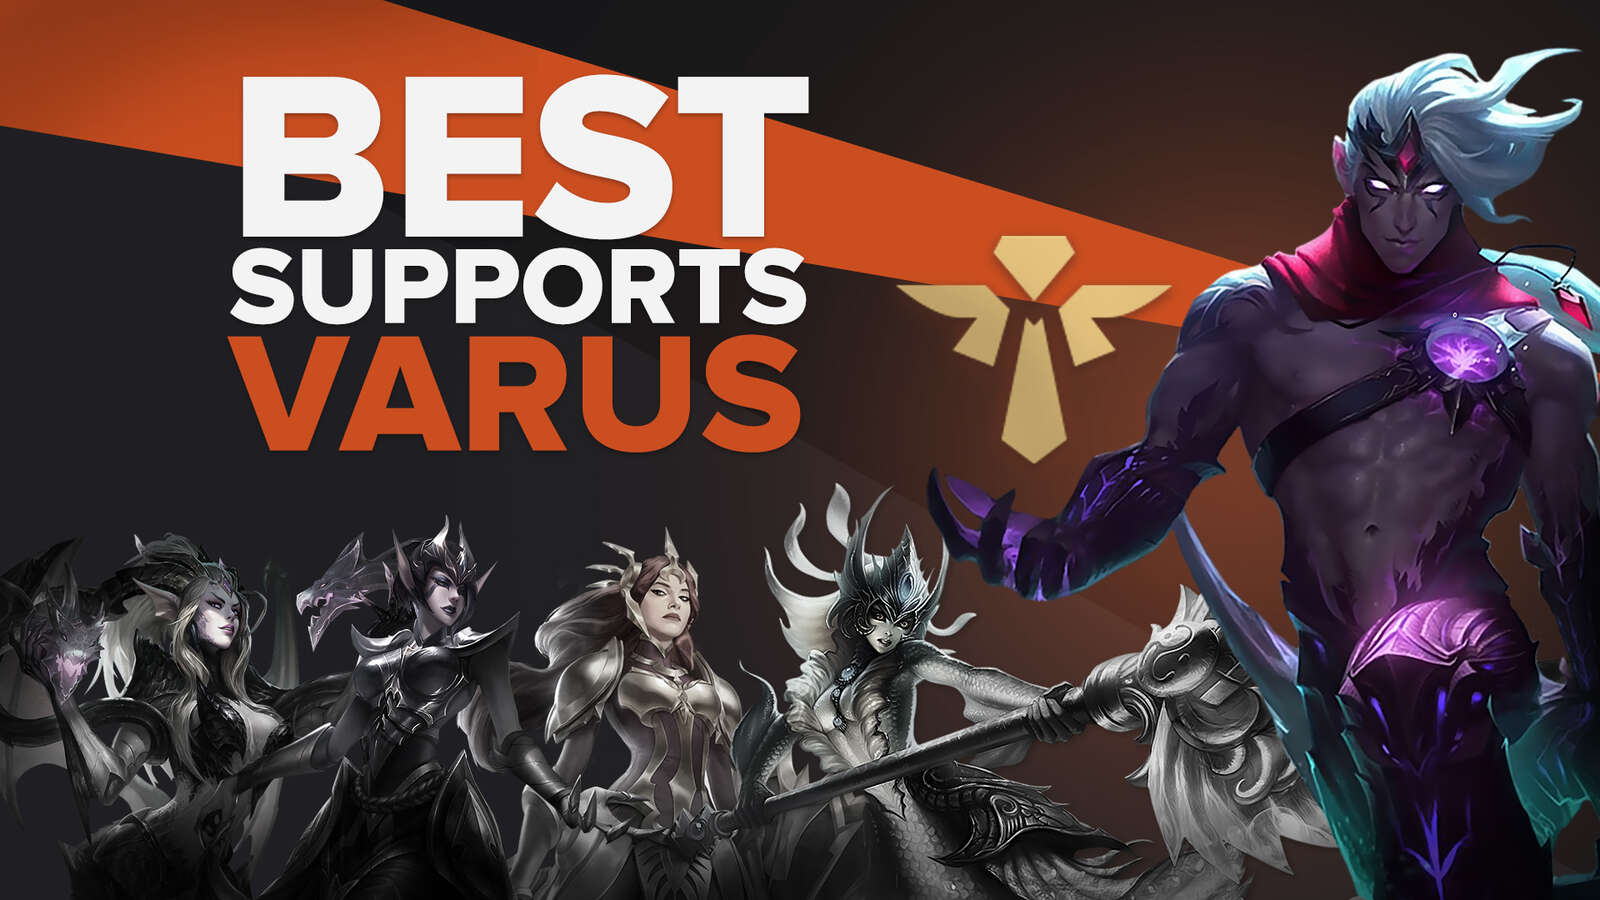 5 Best Support Champions for Varus in LoL [Ranked]